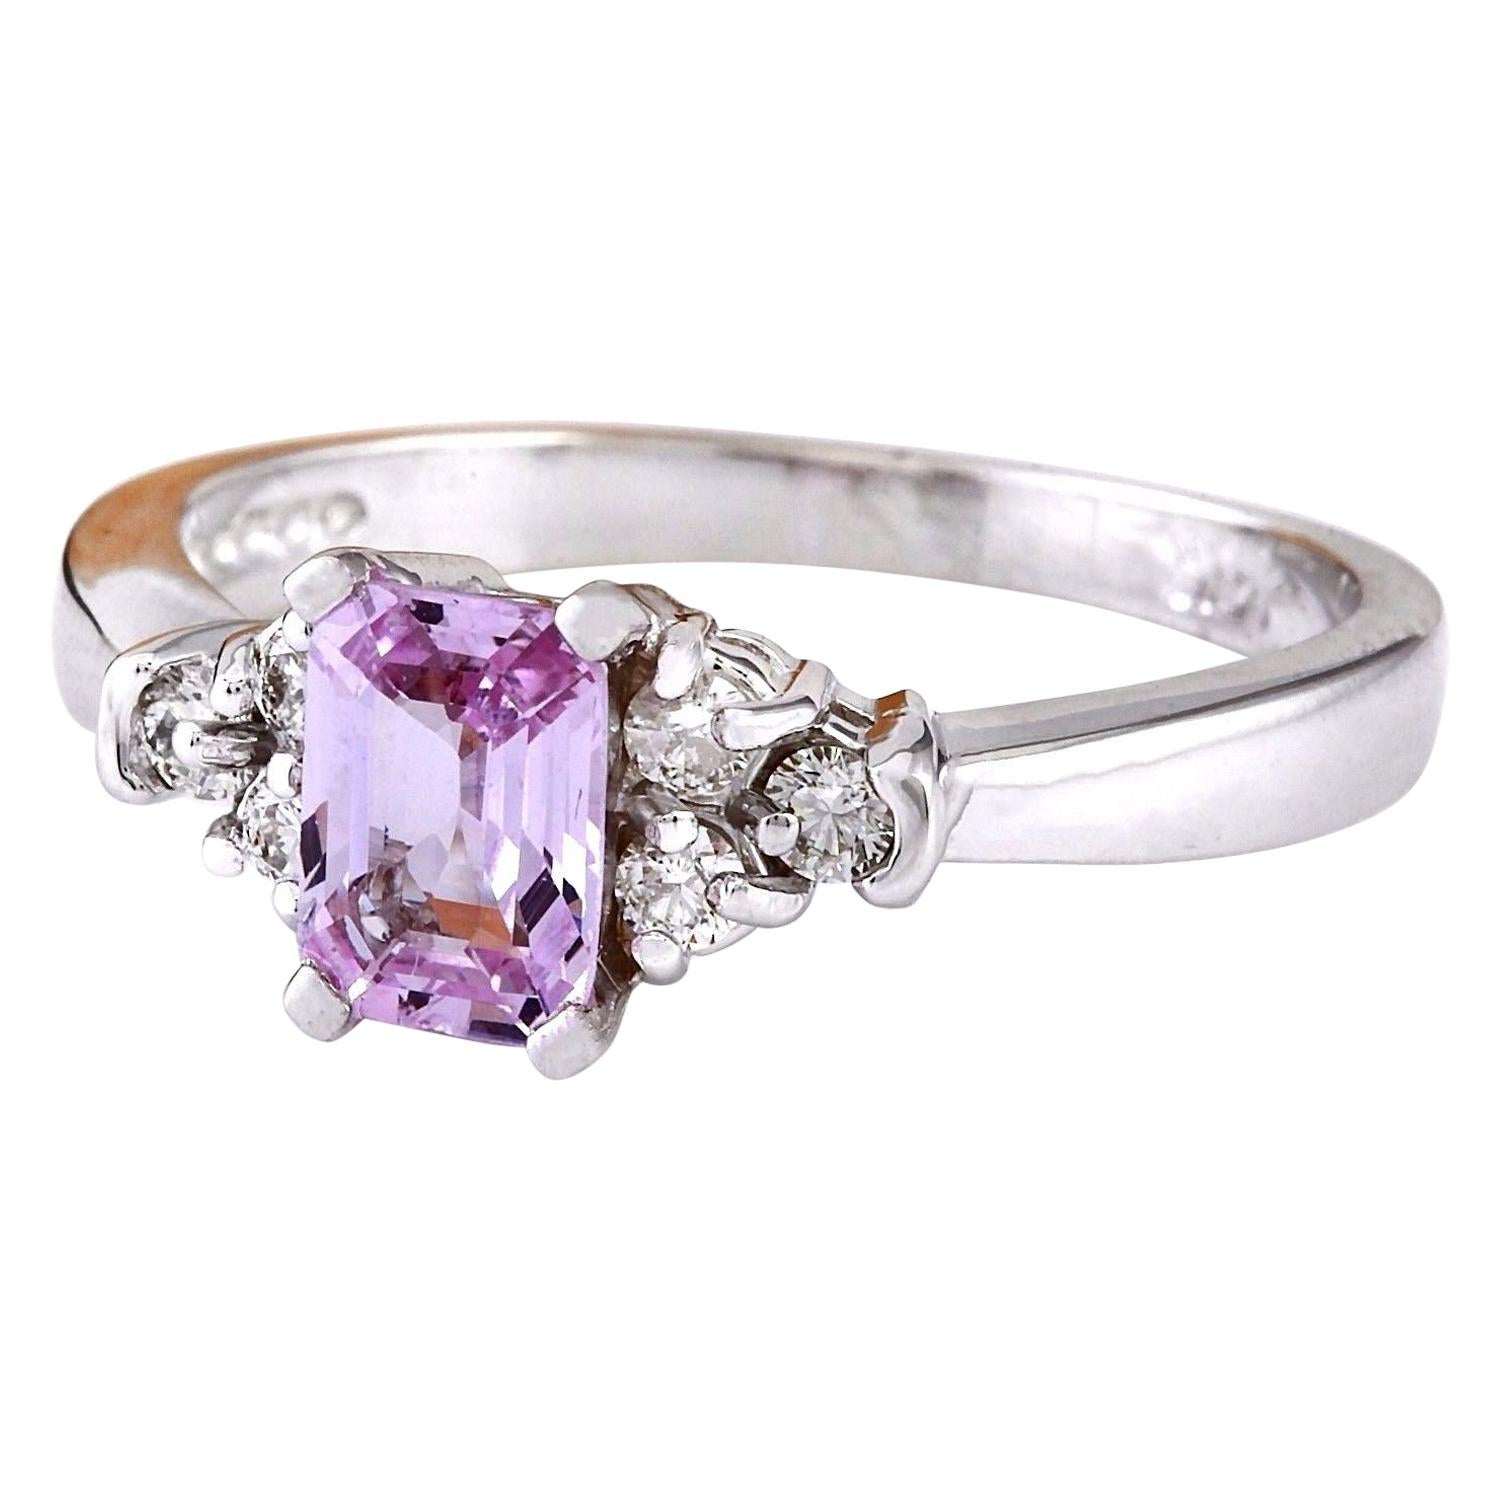 1.00 Carat Natural Sapphire 14K Solid White Gold Diamond Ring
 Item Type: Ring
 Item Style: Engagement
 Material: 14K White Gold
 Mainstone: Sapphire
 Stone Color: Pink
 Stone Weight: 0.80 Carat
 Stone Shape: Emerald
 Stone Quantity: 1
 Stone